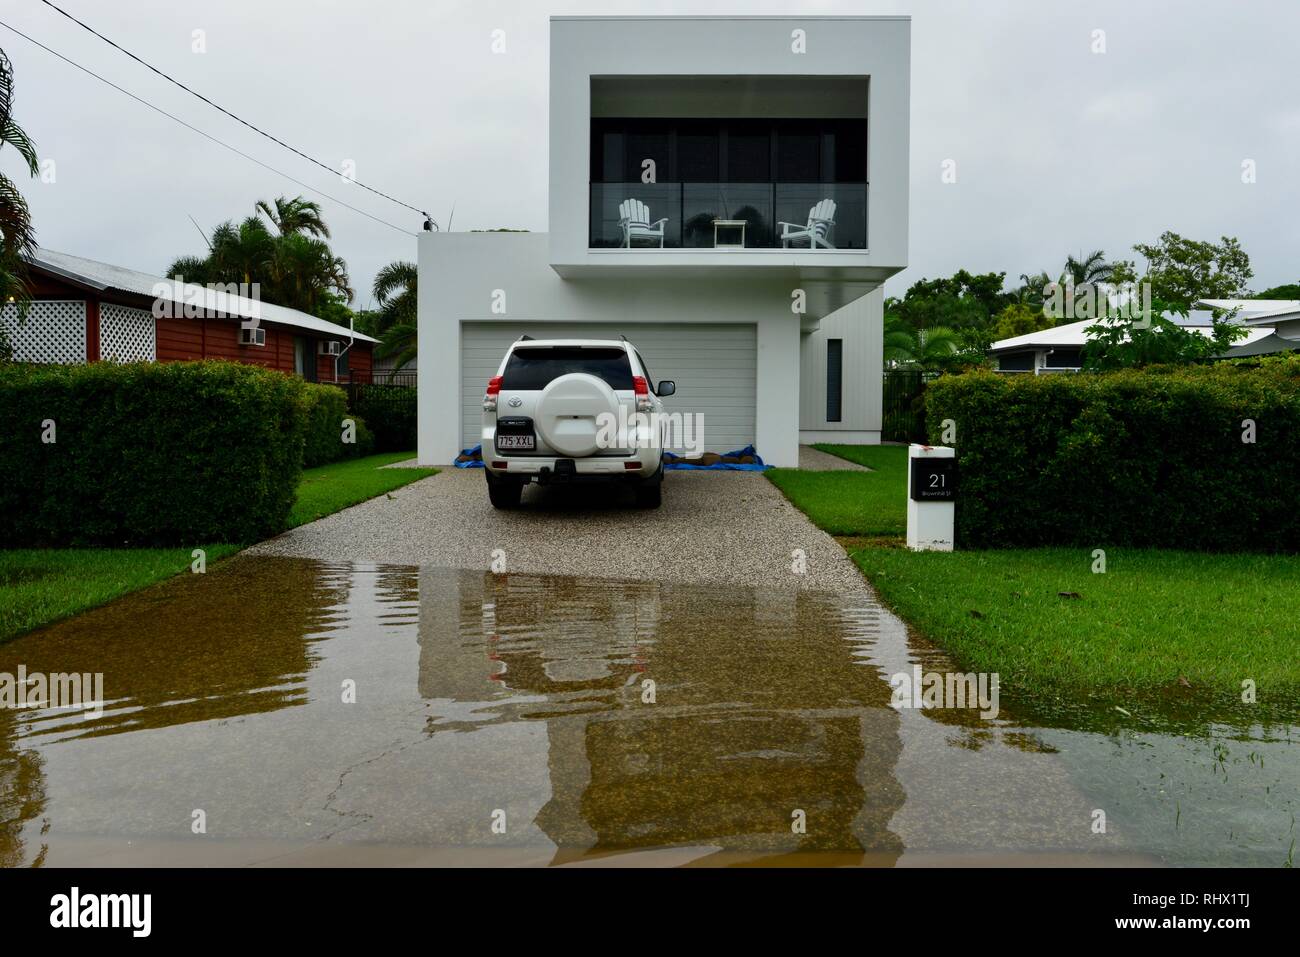 A car parked in a driveway sitting near flood waters. Townsville, Queensland, Australia. 4th Feb 2019. Flooding continued to worsen as the deluge continued and more water was released from the bulging Ross River dam to prevent the failure of the dam wall. 1000's of residents were evacuated overnight. Credit: P&F Photography/Alamy Live News Stock Photo